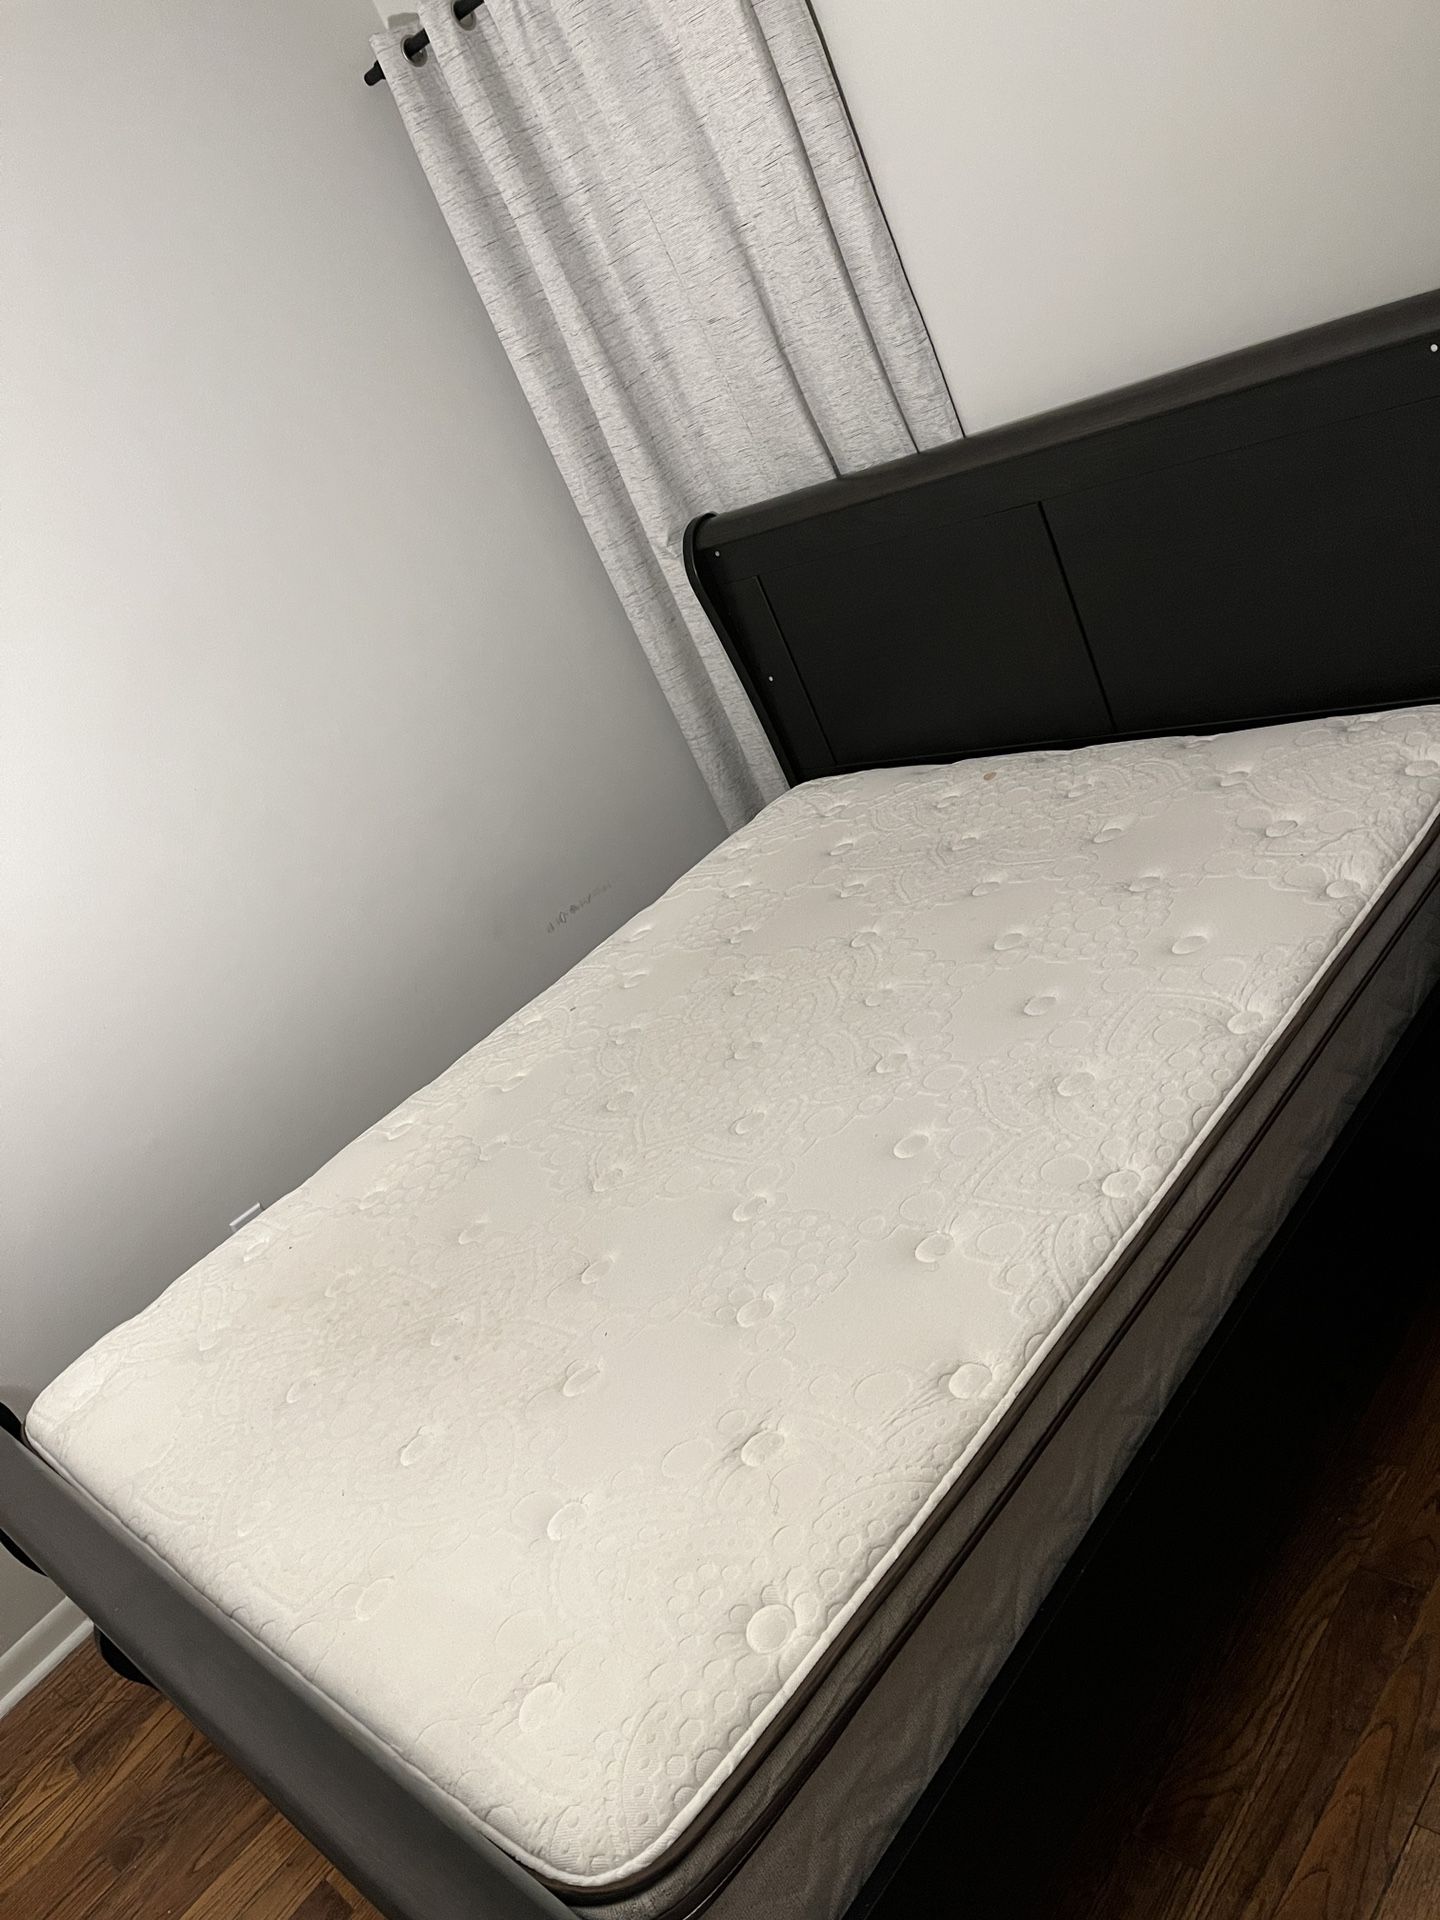 Used Queen Mattress For Sale 